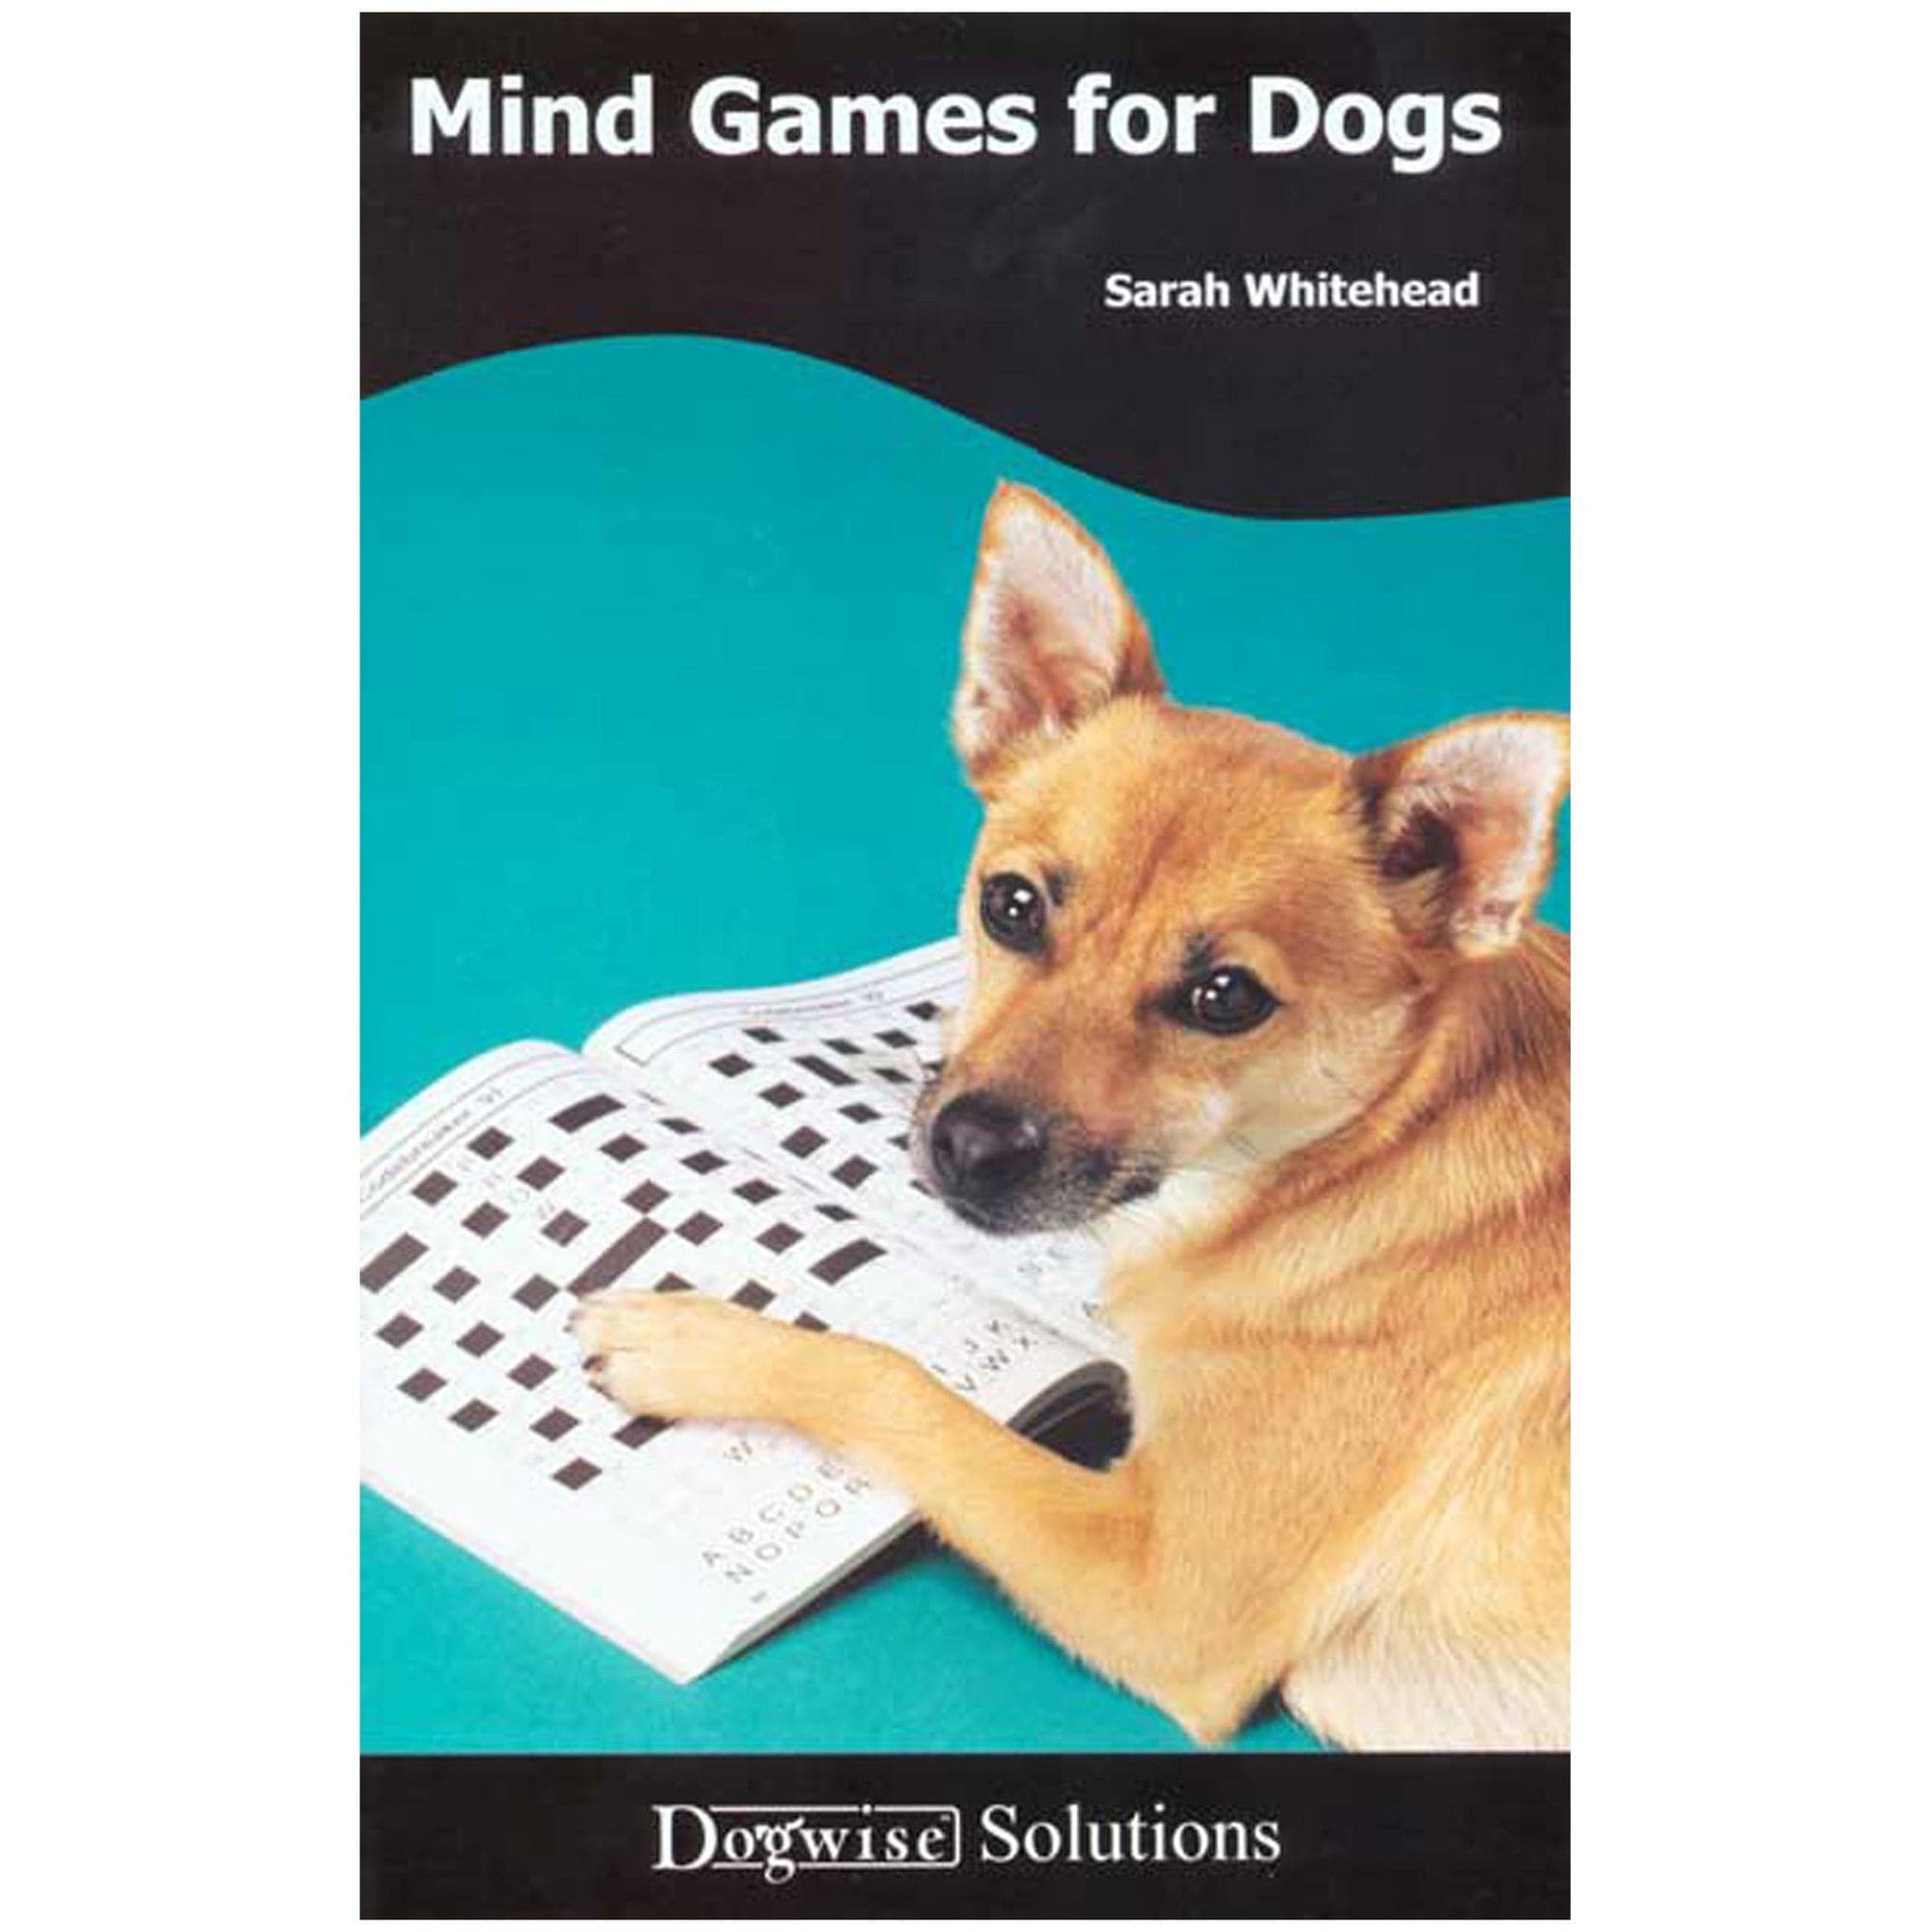 10 Fun Brain Games For Dogs: Keep Your Dog Active